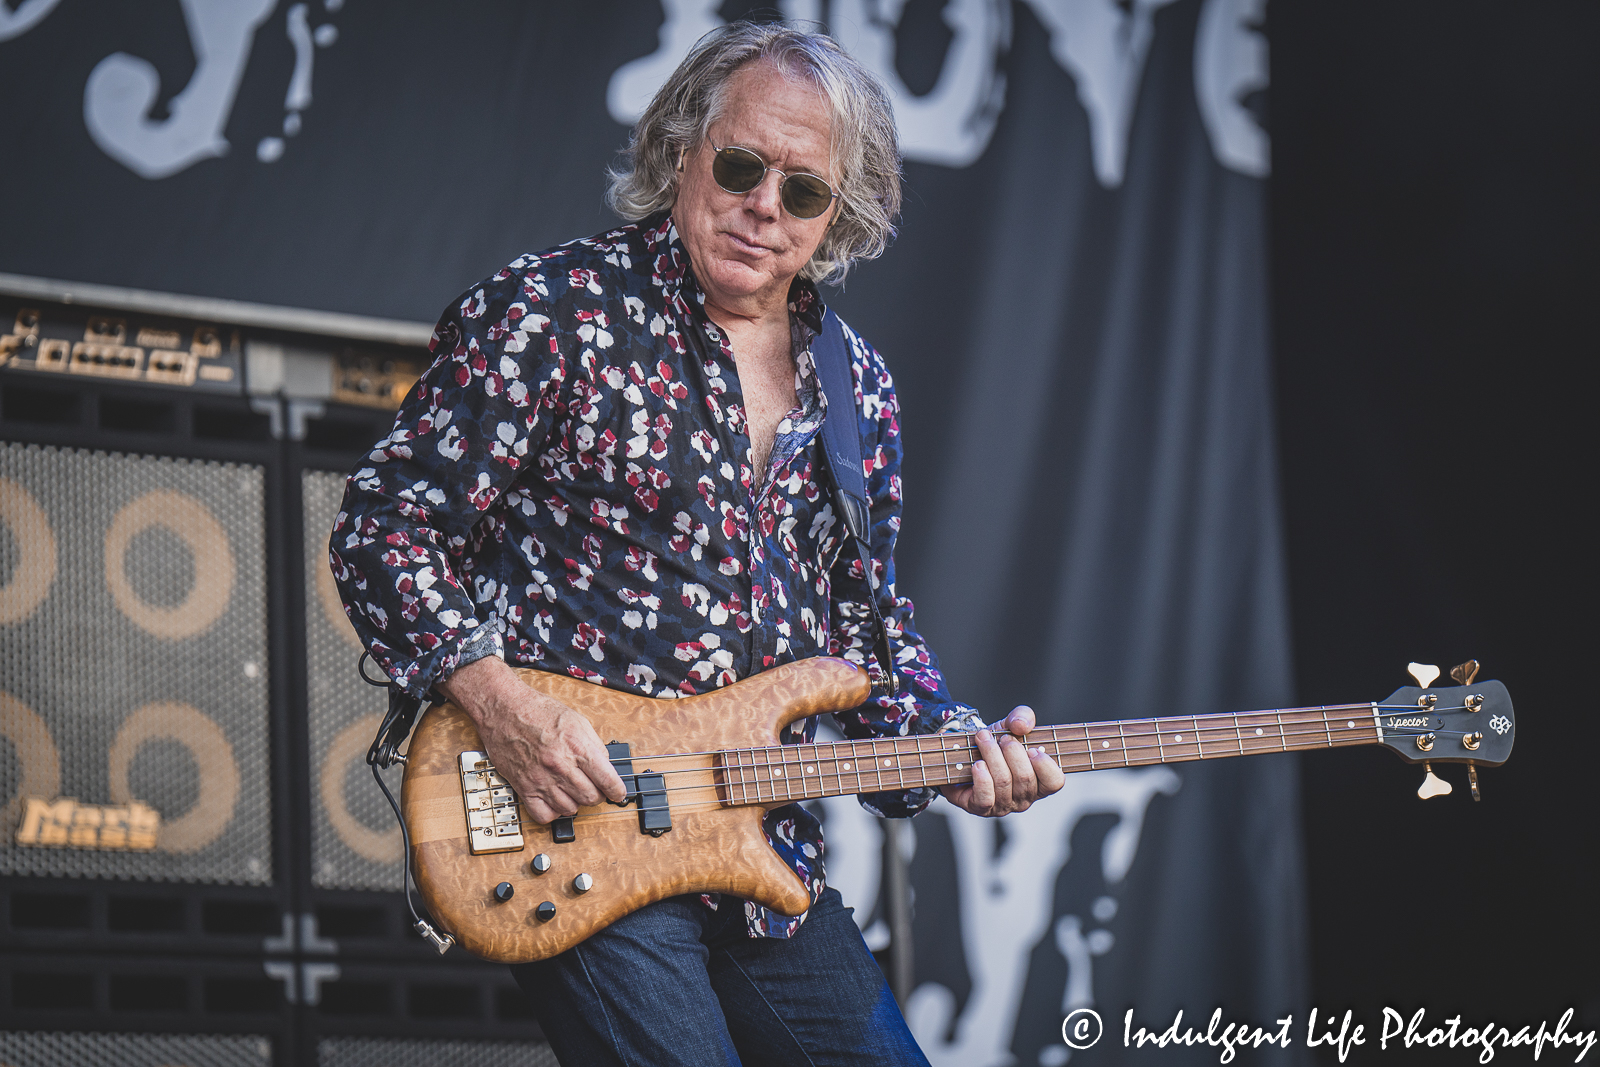 Bass guitar player Ken "Spider" Sinnaeve of Loverboy playing live at Starlight Theatre in Kansas City, MO on June 14, 2022.